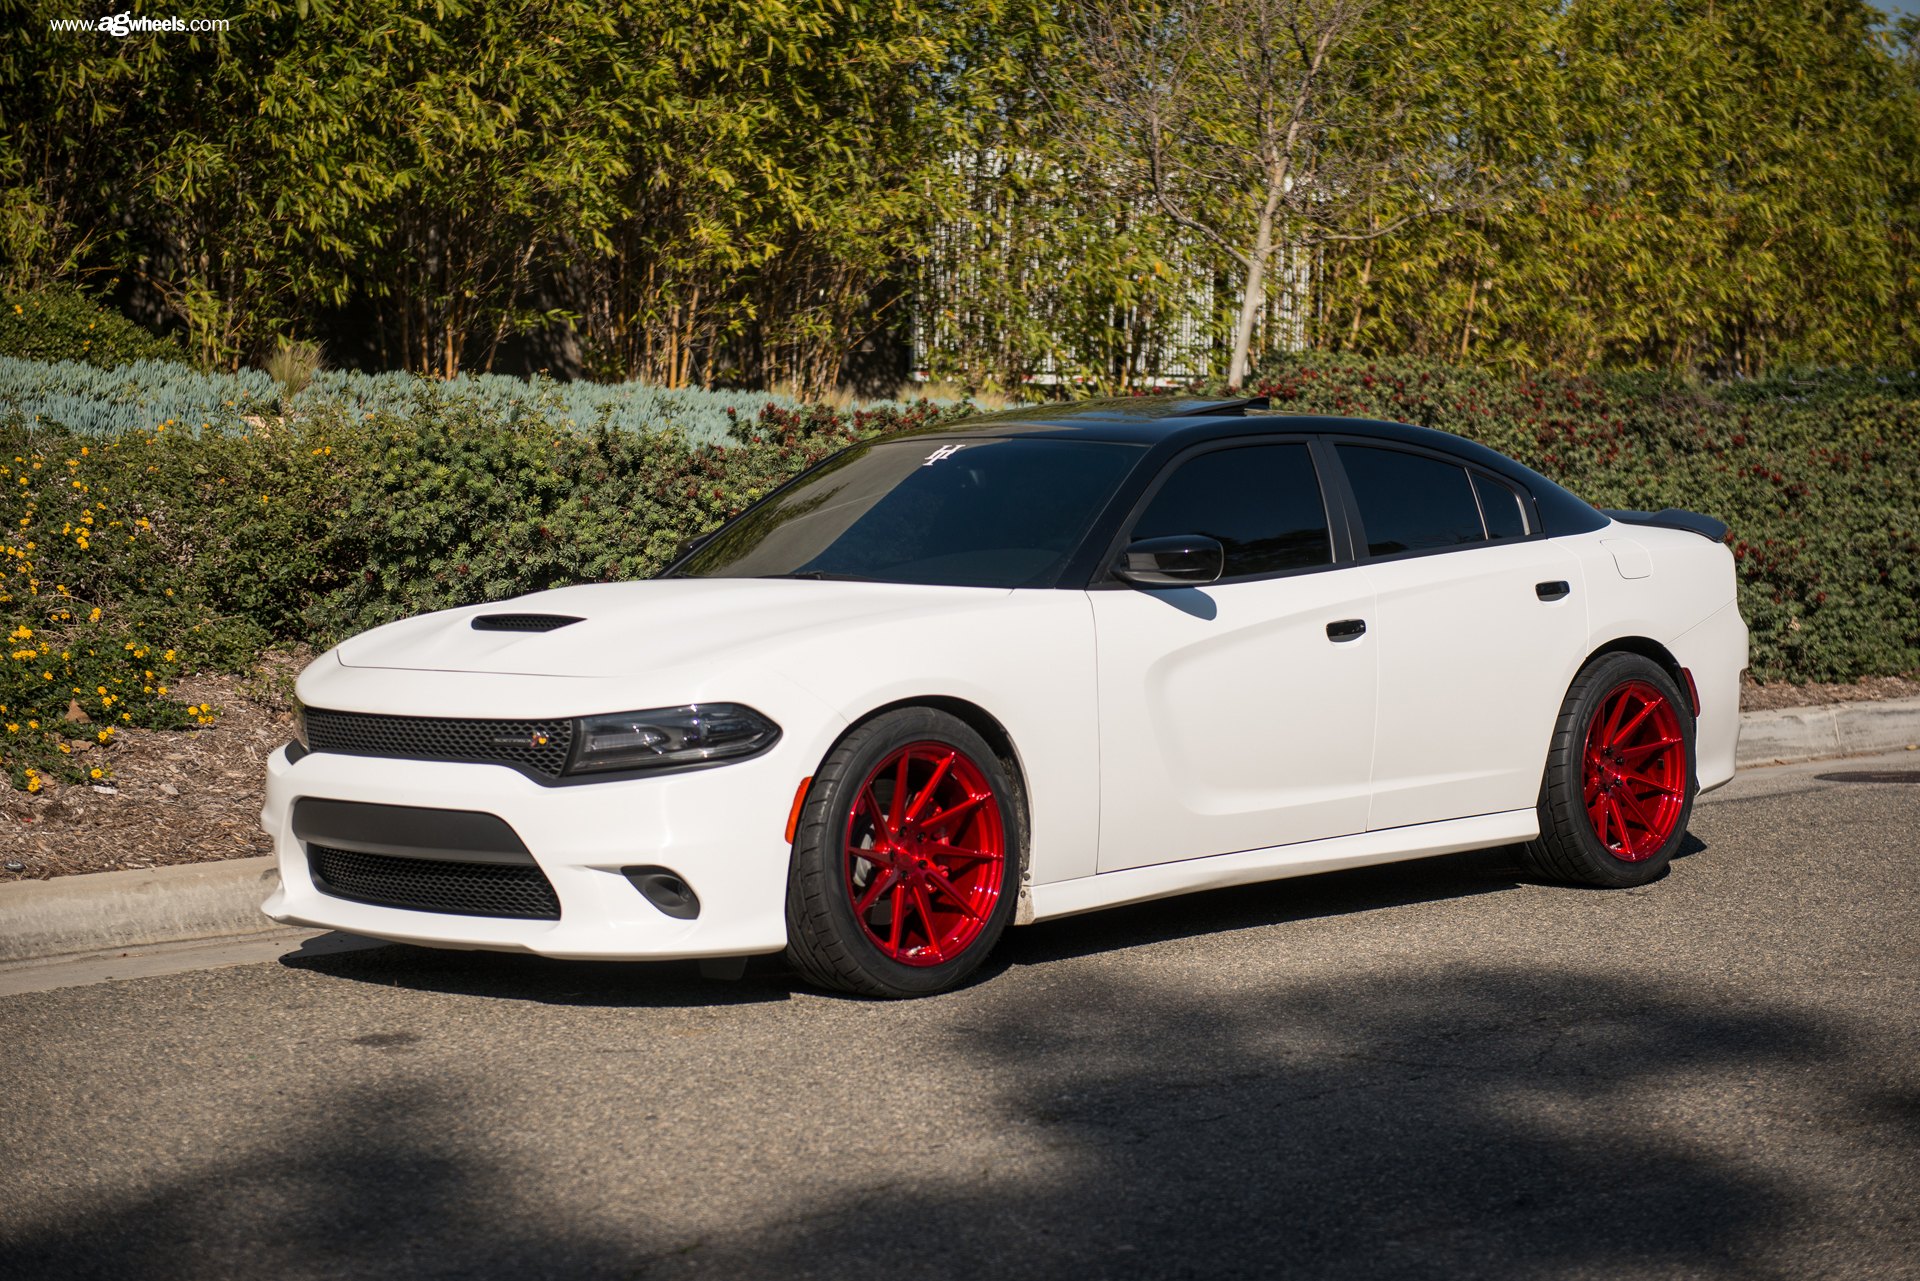 Stylish Warrior: White Dodge Charger with Black Roof and Red Wheels